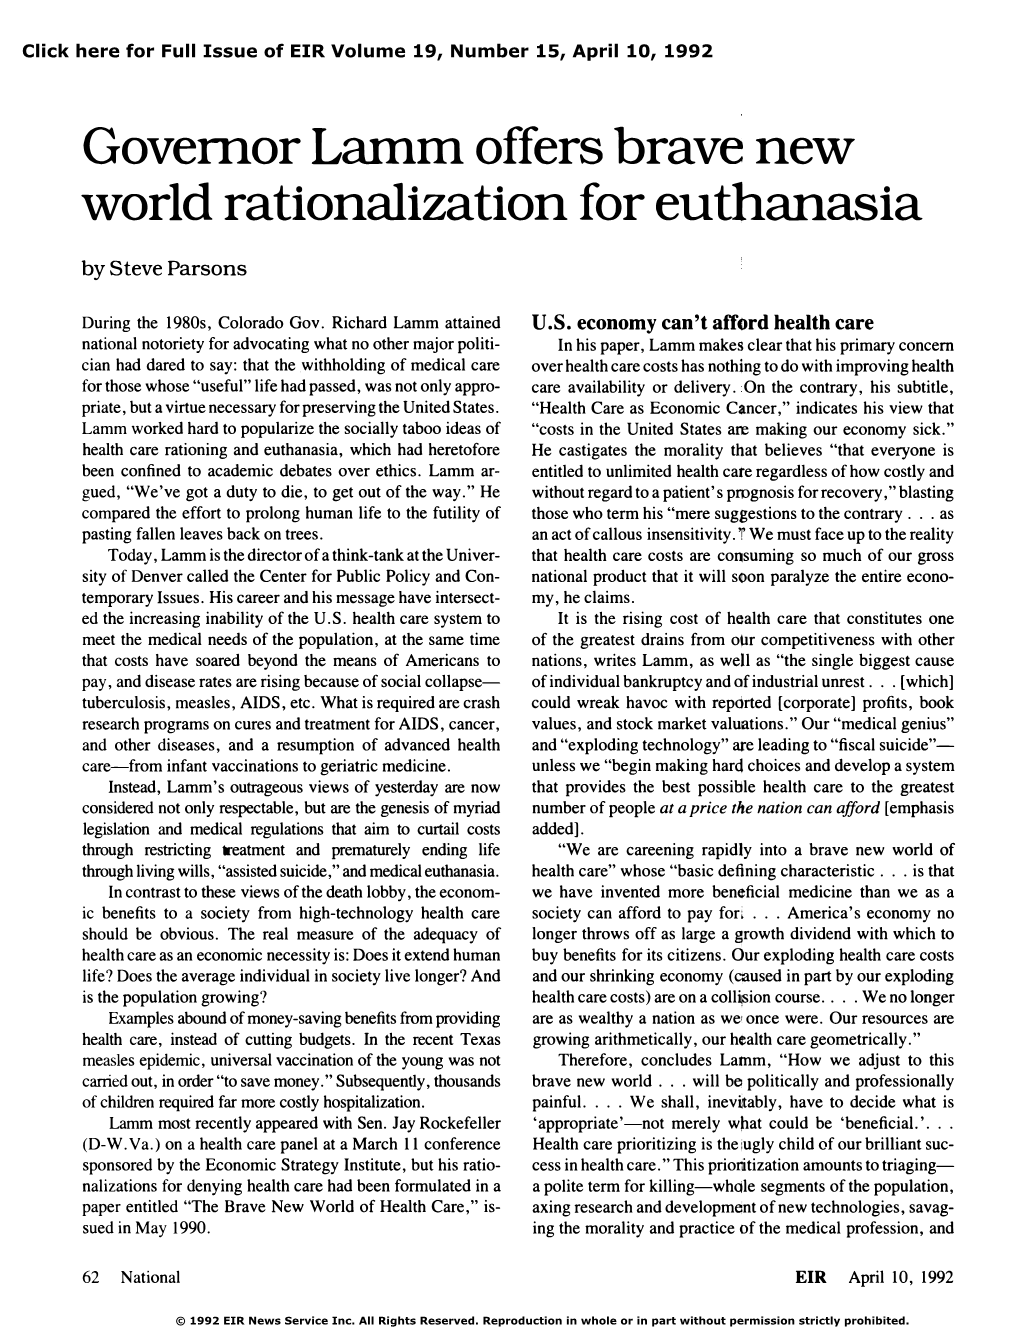 Governor Lamm Offers Brave New World Rationalization for Euthanasia